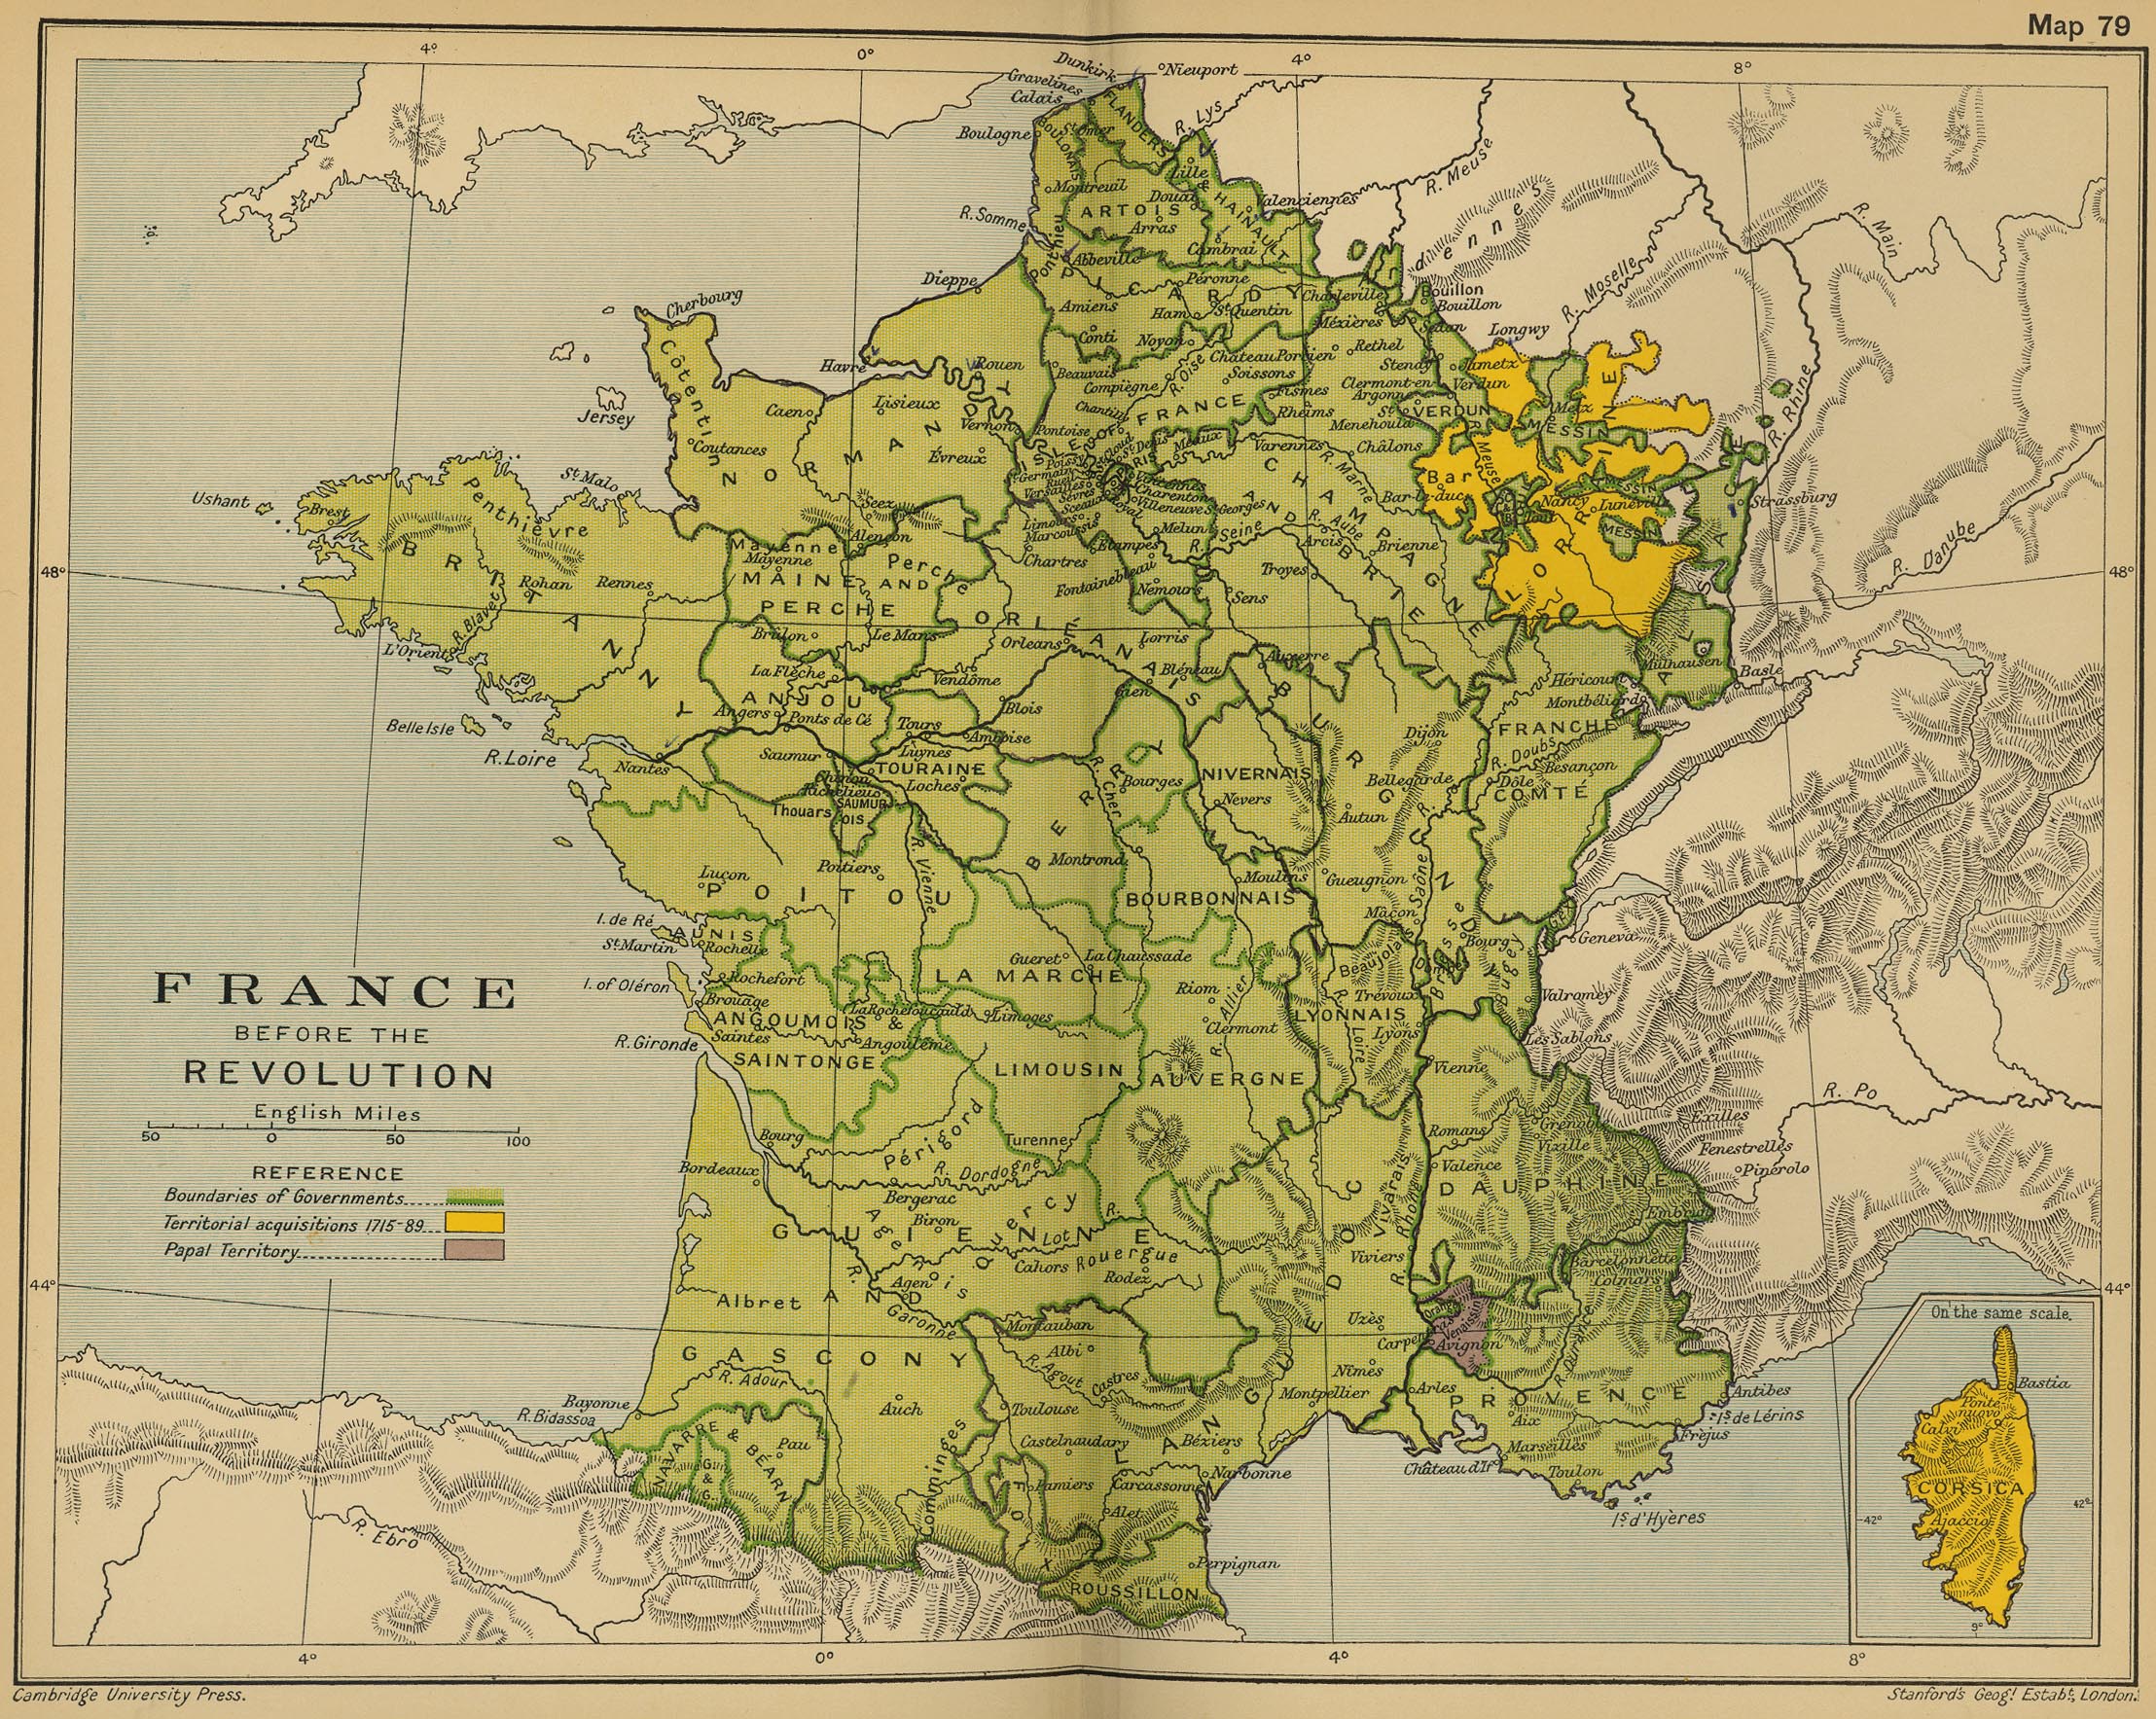 Map of France before the Revolution